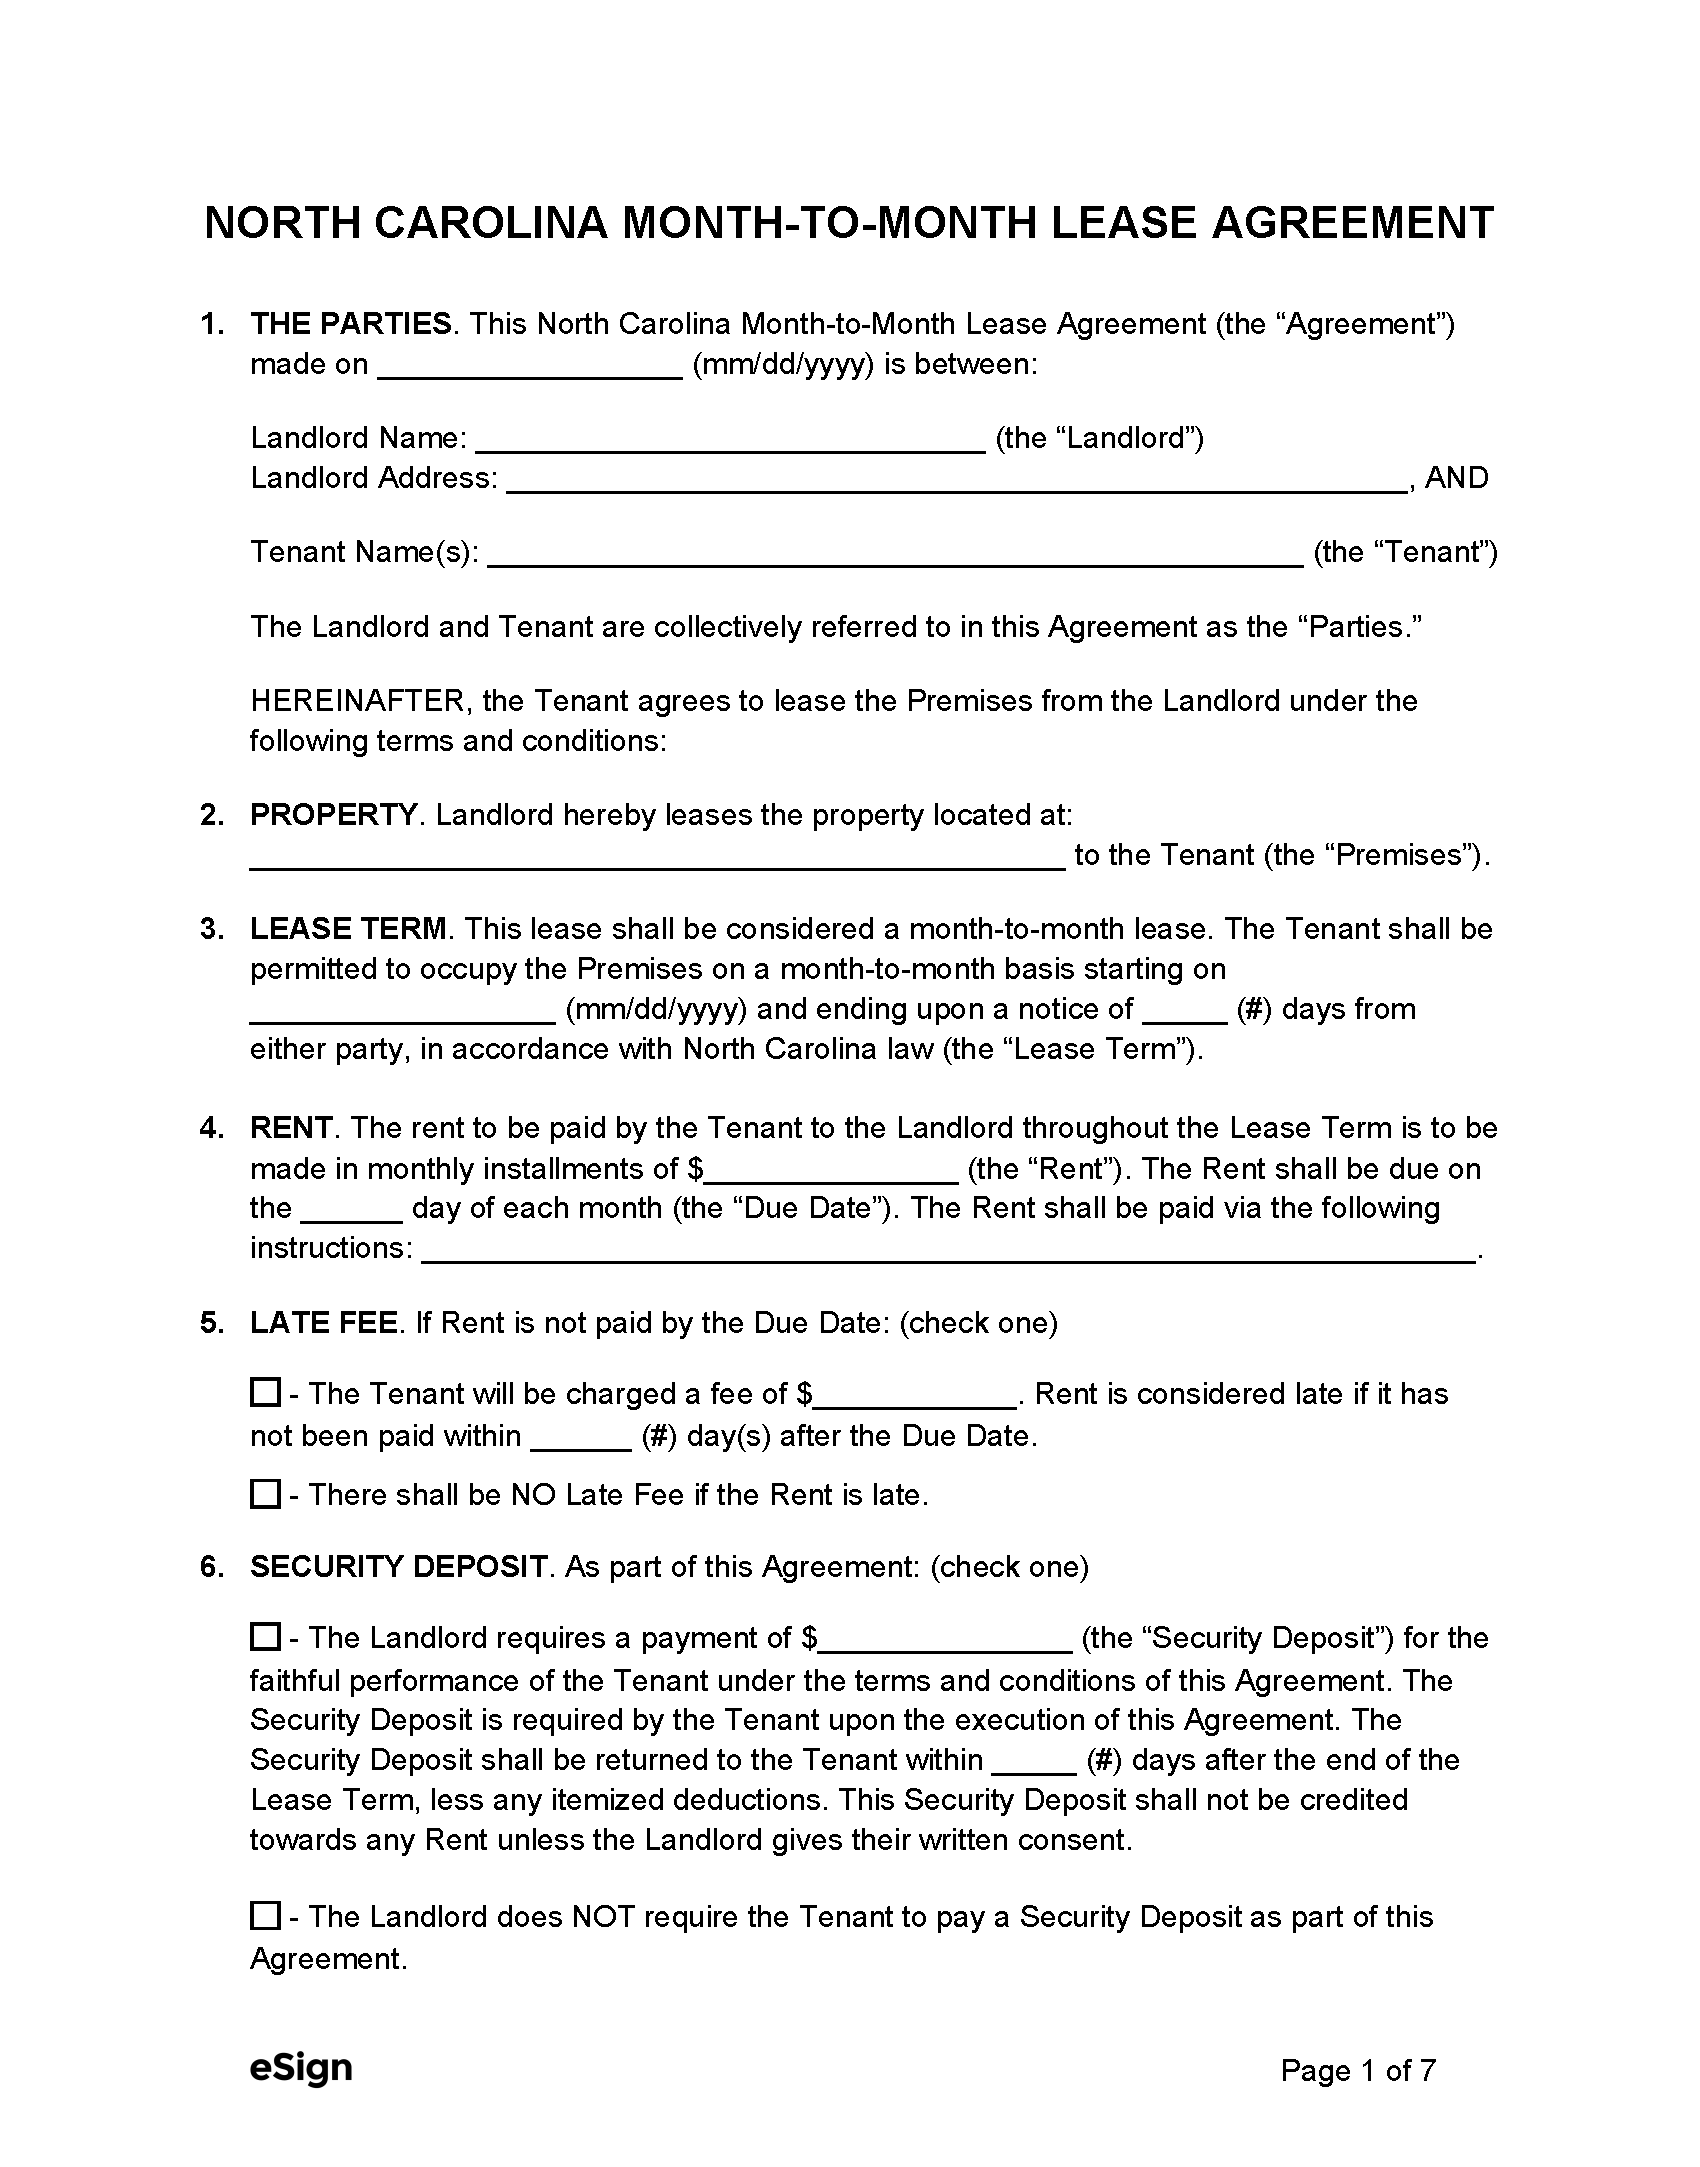 free-north-carolina-month-to-month-lease-agreement-template-pdf-word